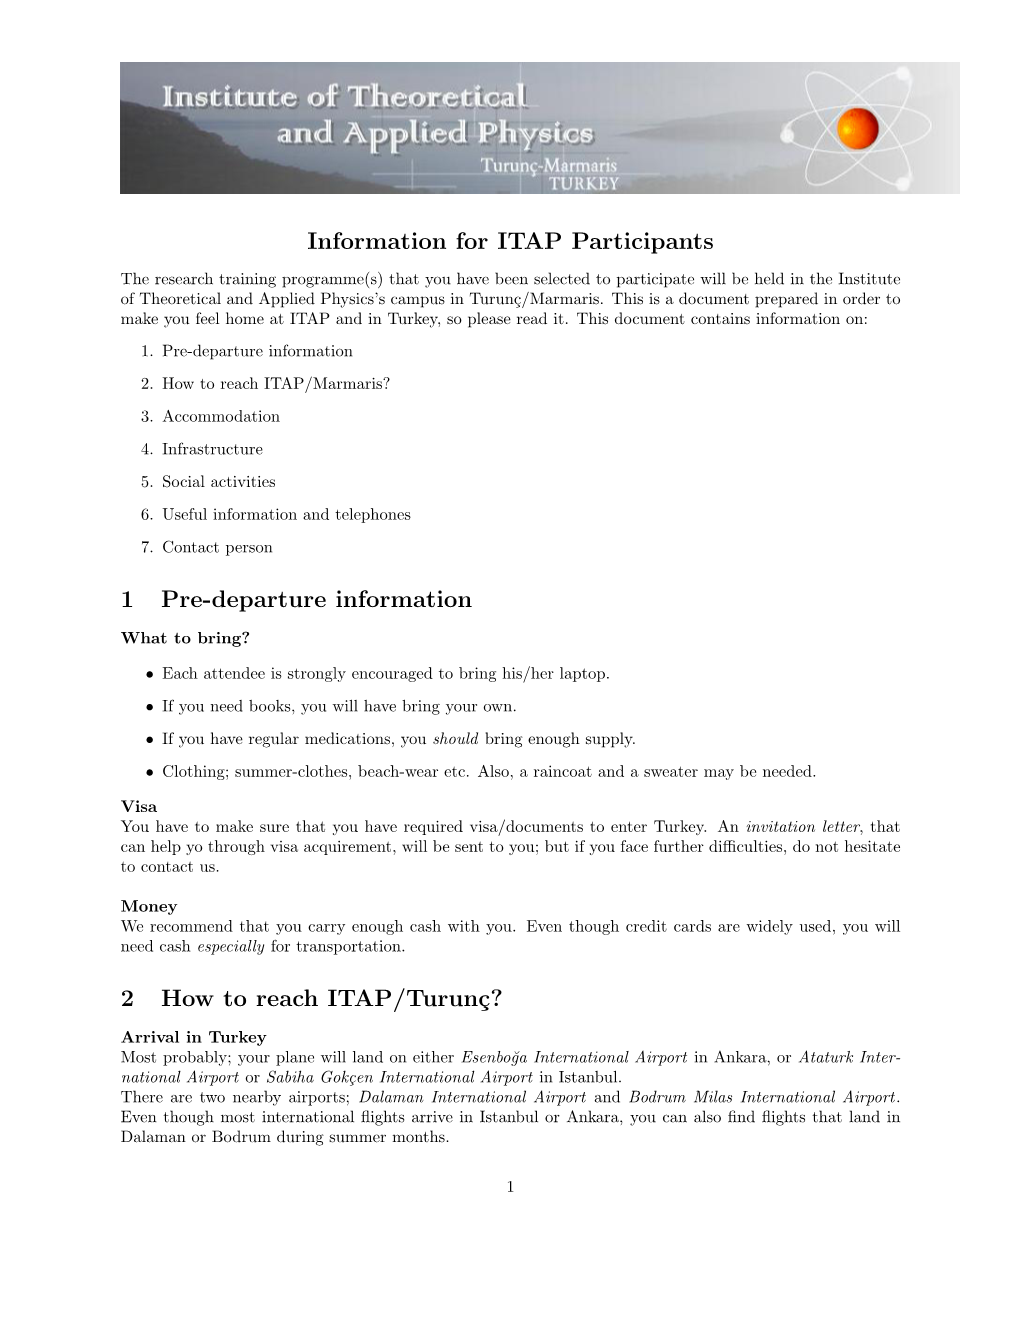 Information for ITAP Participants 1 Pre-Departure Information 2 How To